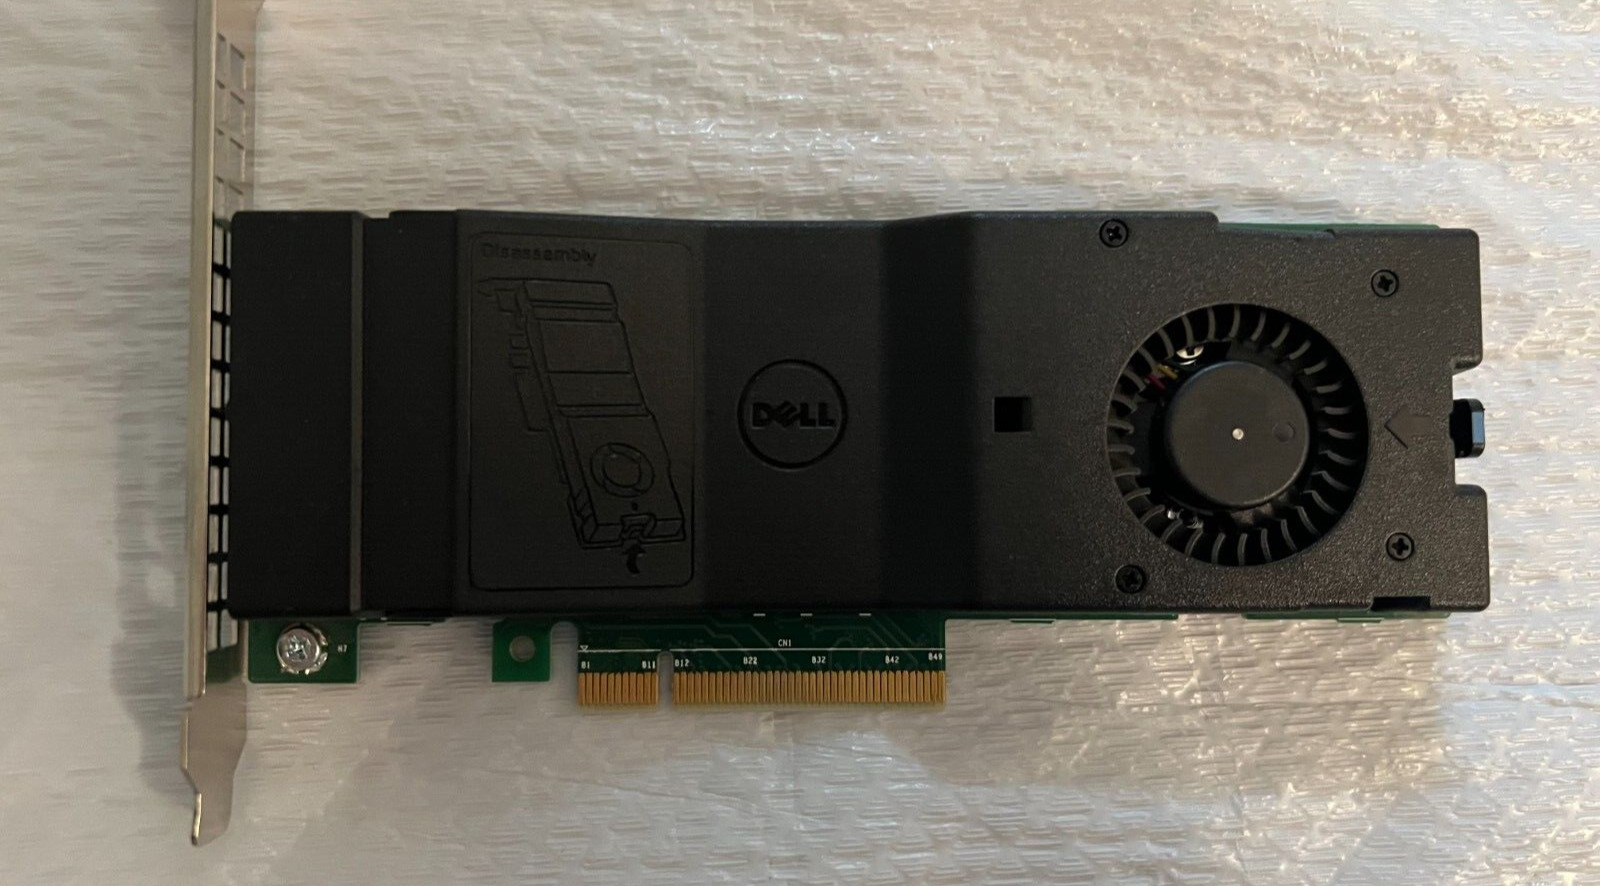 Dell DPWC300 SSD PCIE Adapter Card 2 Slot M.2 0NTRCY 023PX6 + 512GB m.2 NVME SSD